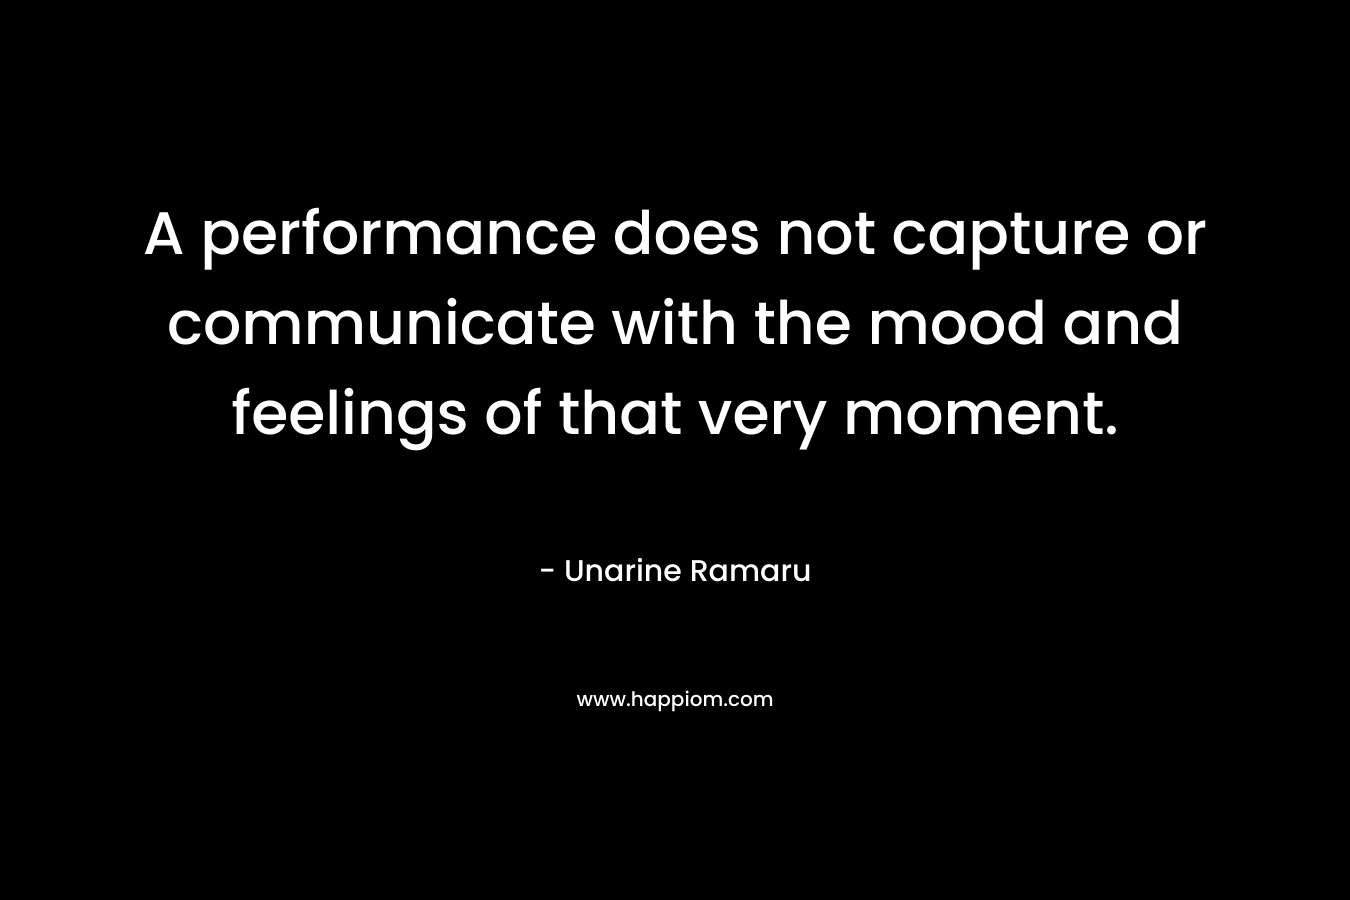 A performance does not capture or communicate with the mood and feelings of that very moment.